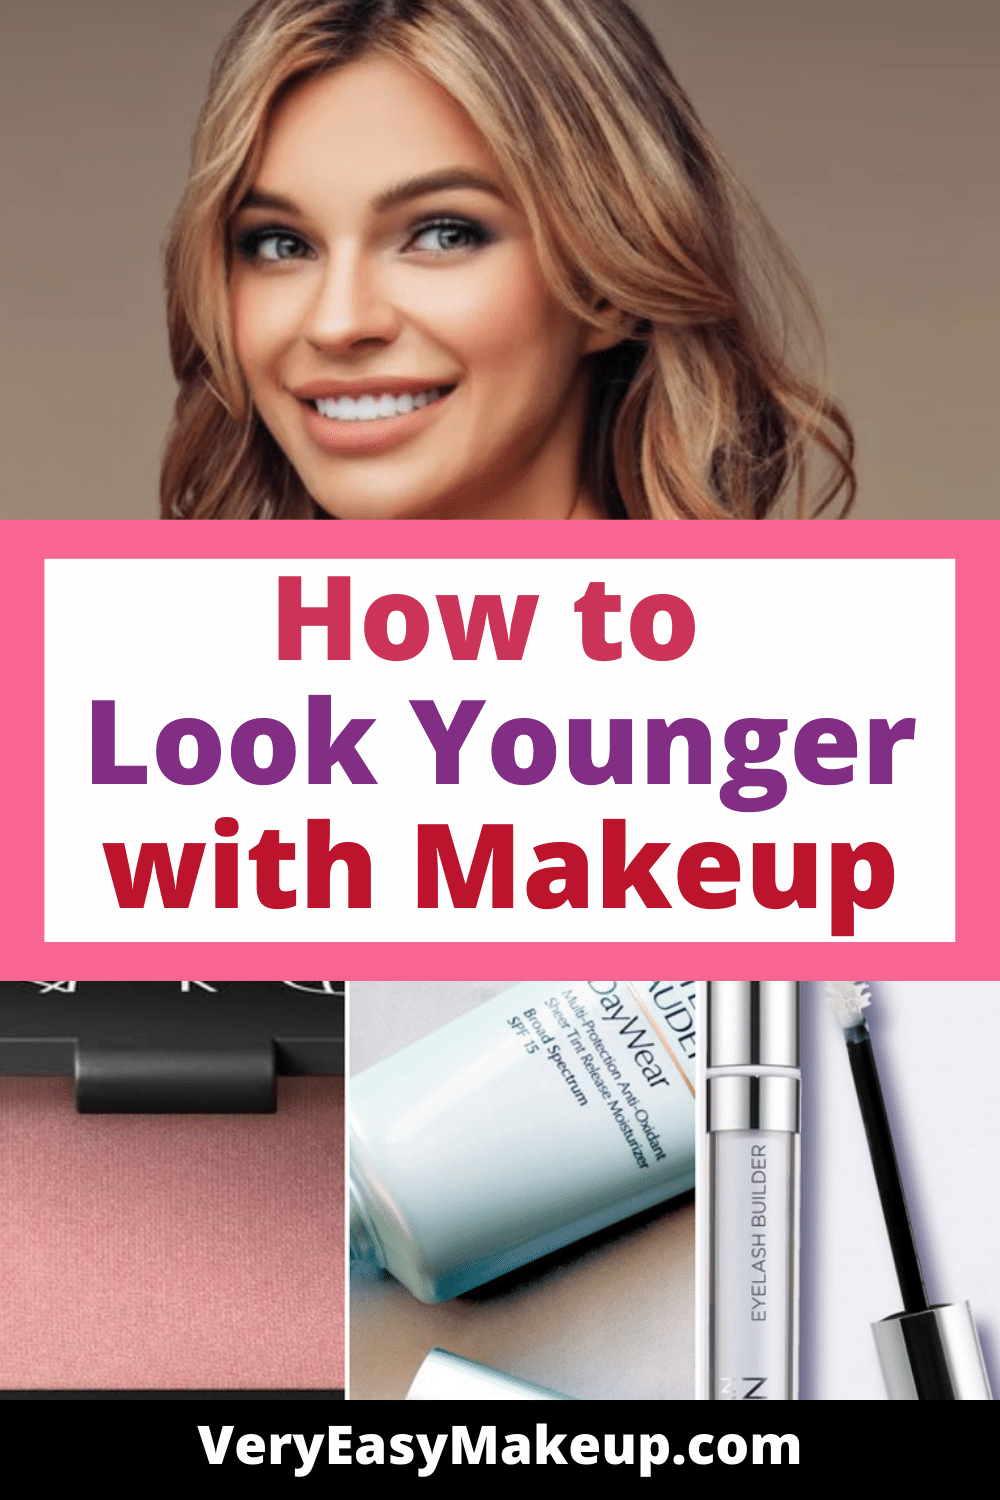 how to look younger with makeup by VeryEasyMakeup.com